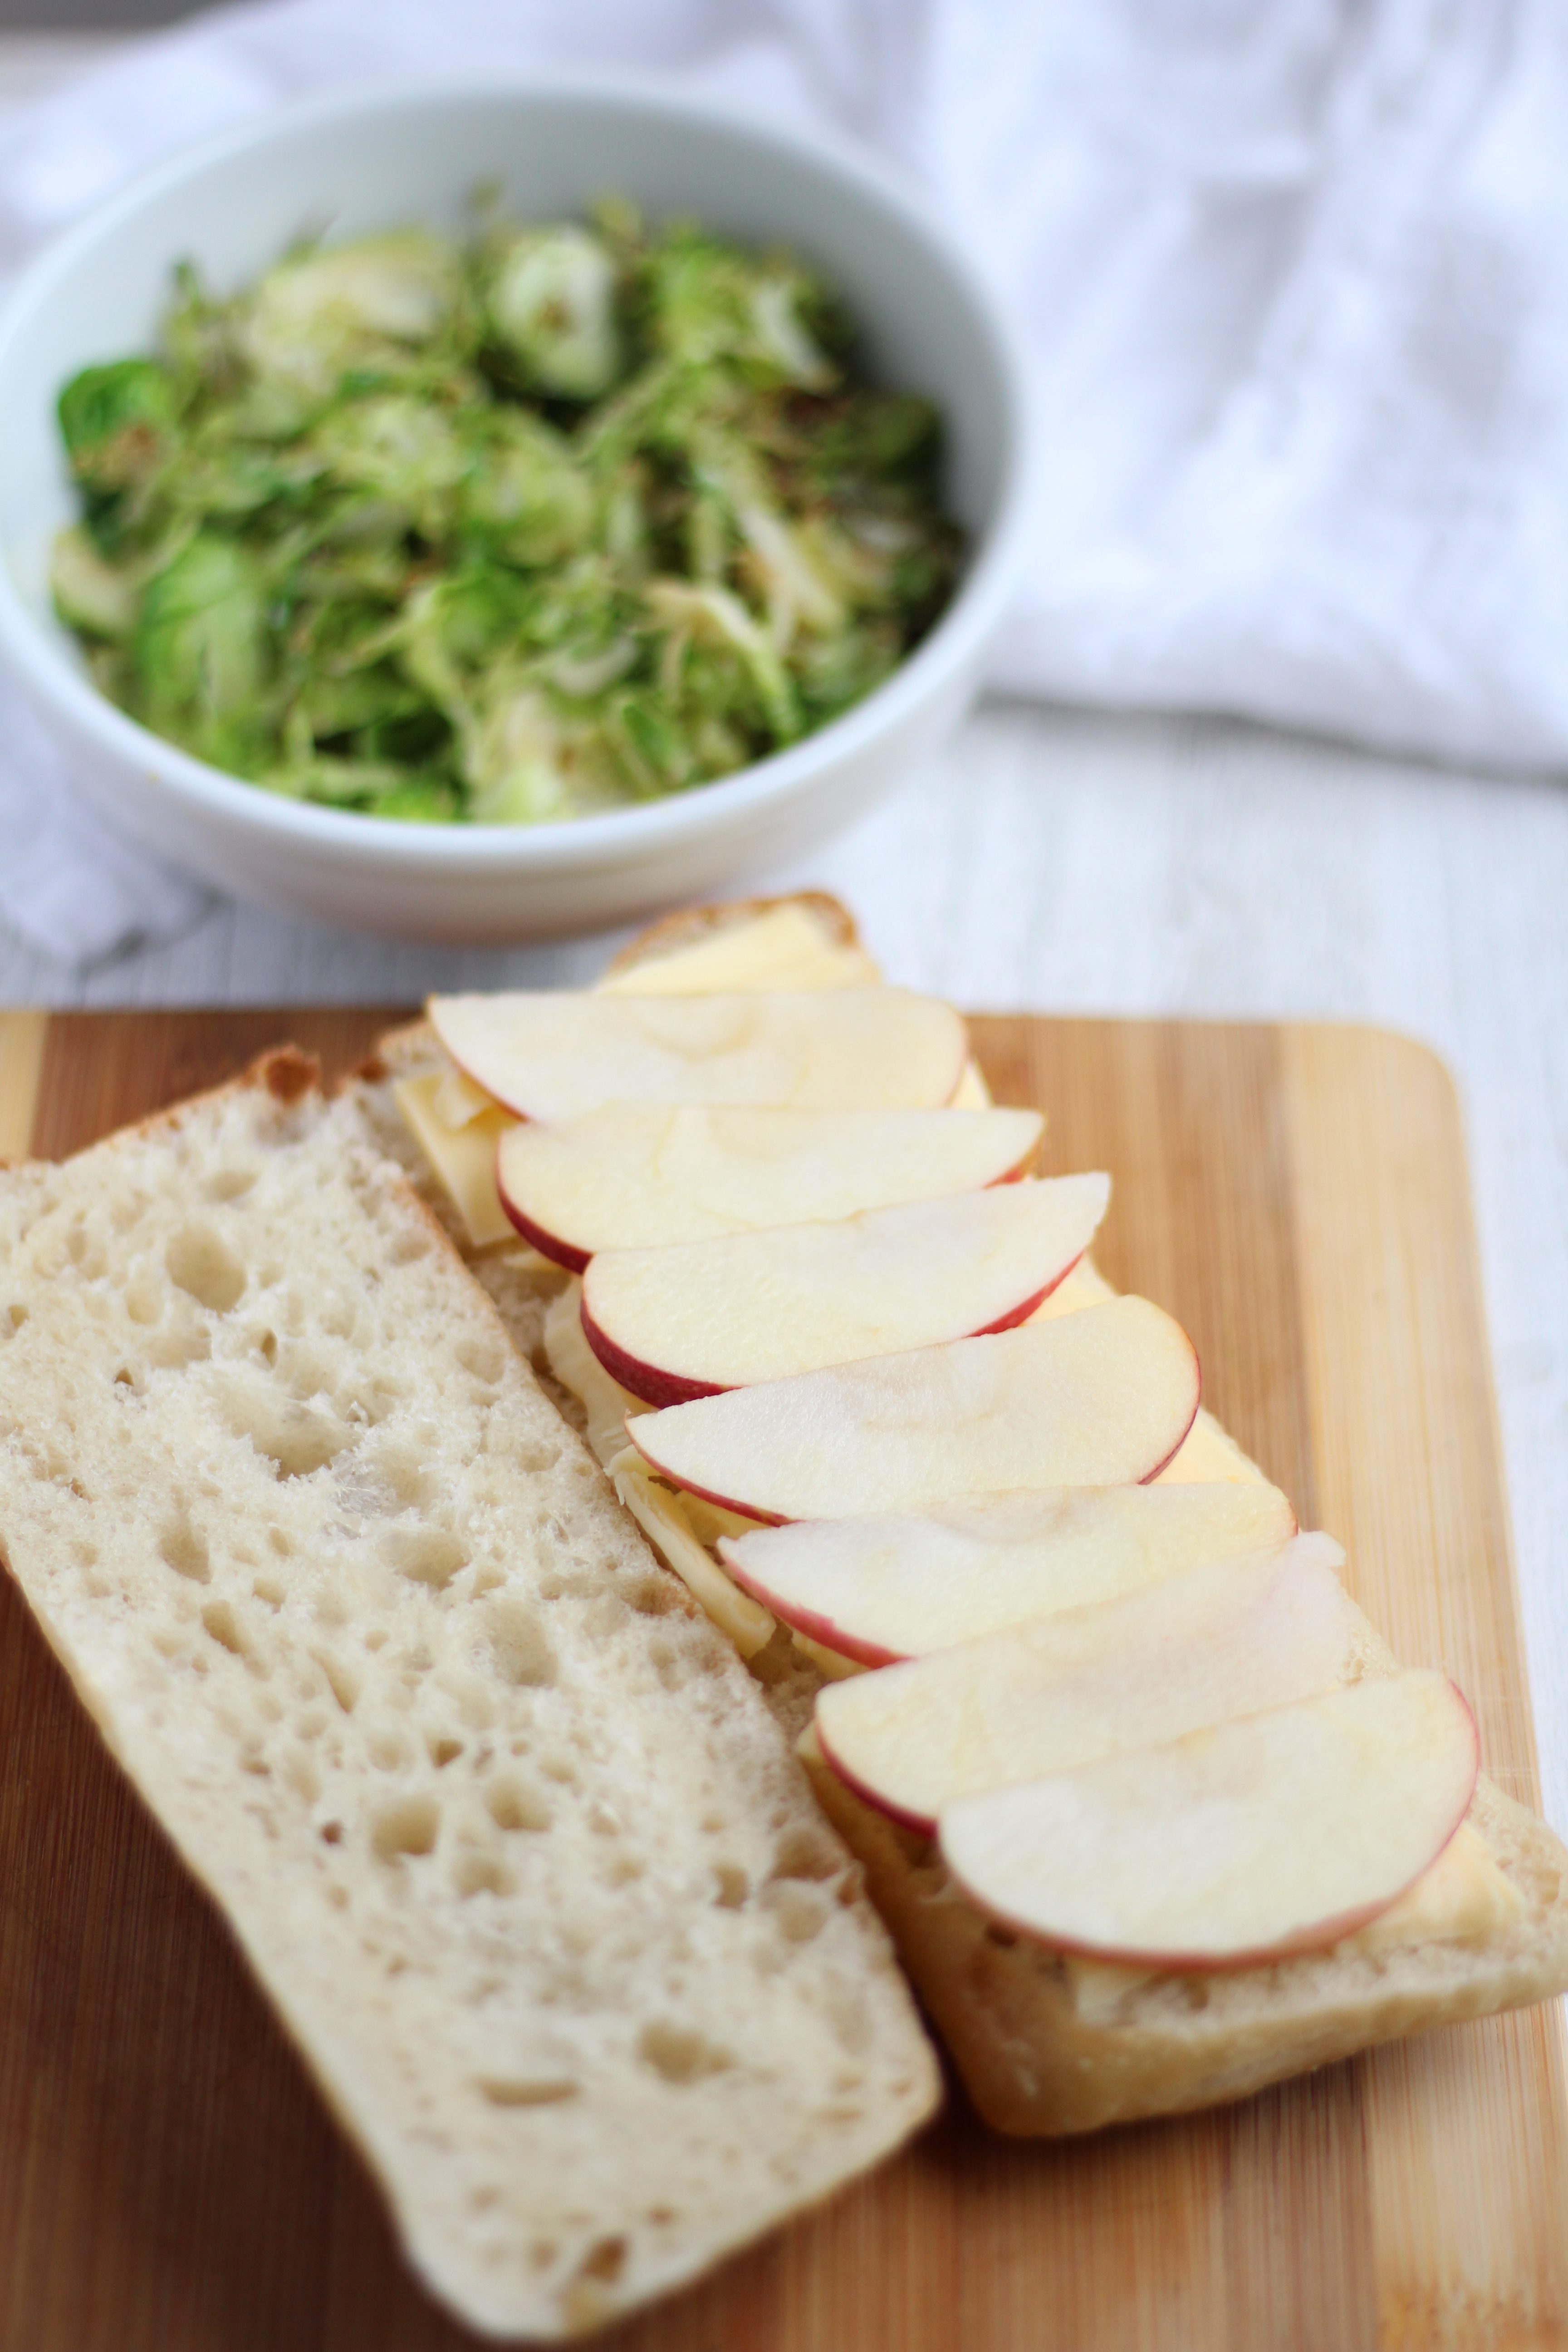 Grilled cheese taken to the next level with brussels sprouts and apples - perfect for fall!